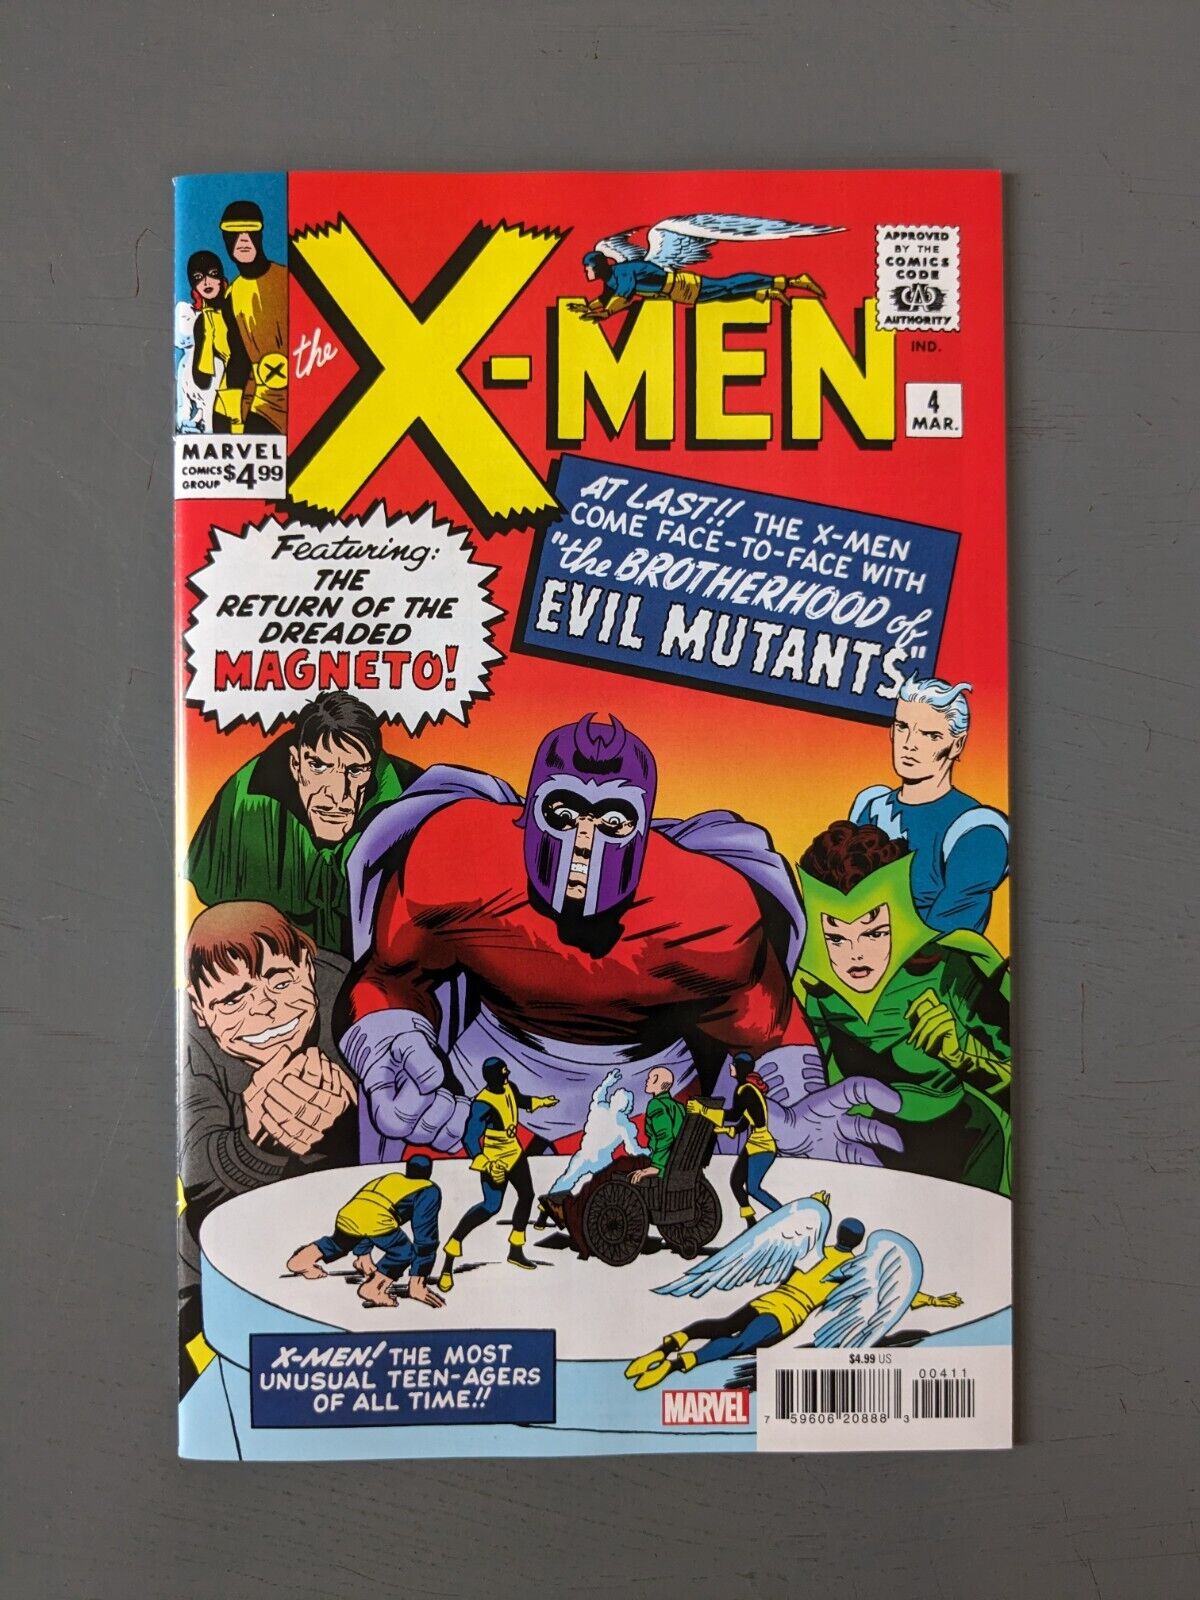 X-Men (1963 - ongoing) books at The Arkham Library Comics & Collectibles